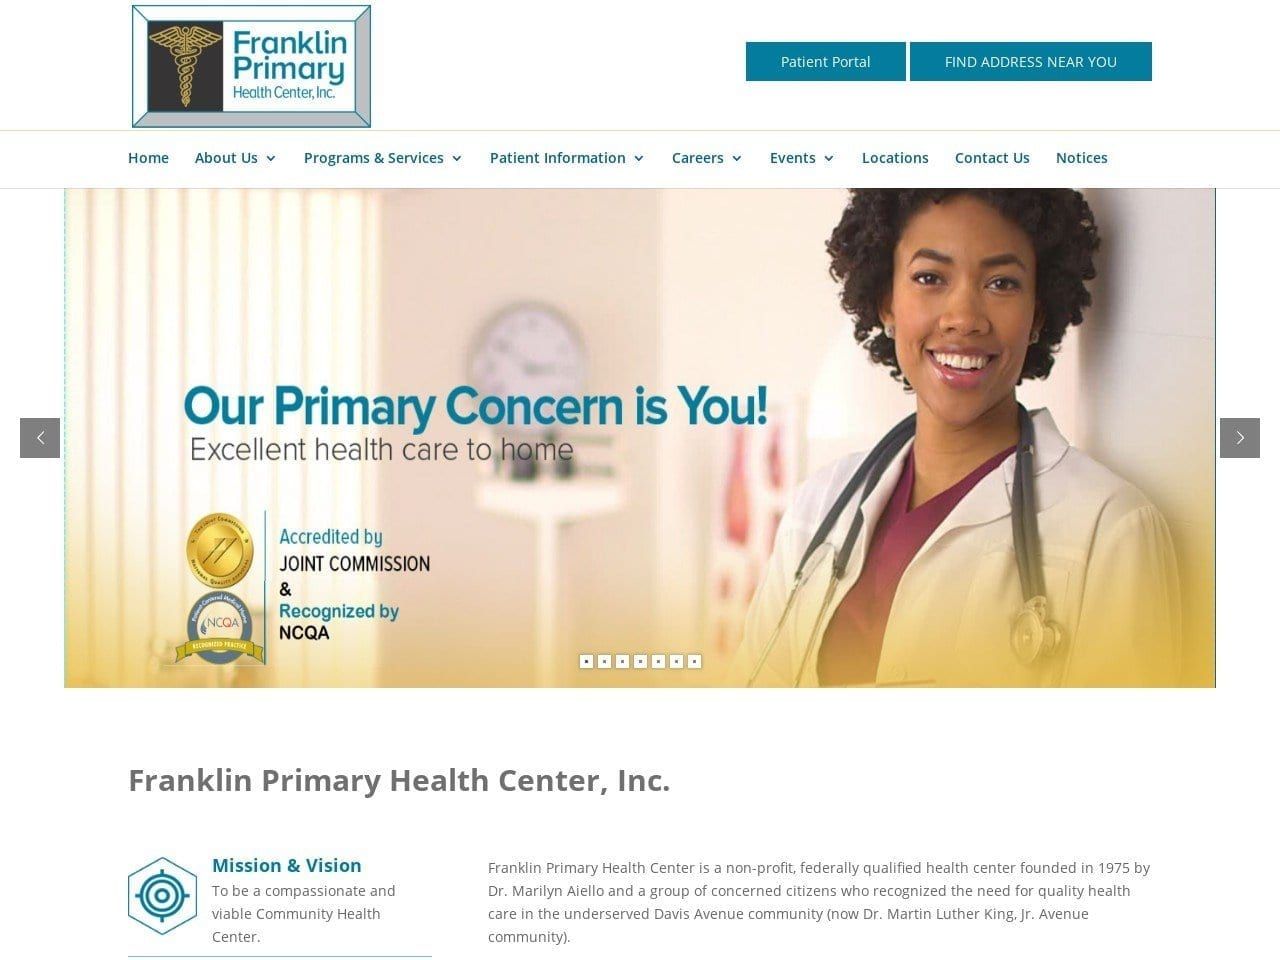 Franklin Primary Health Center Dickerson Mary DDS Website Screenshot from franklinprimary.org